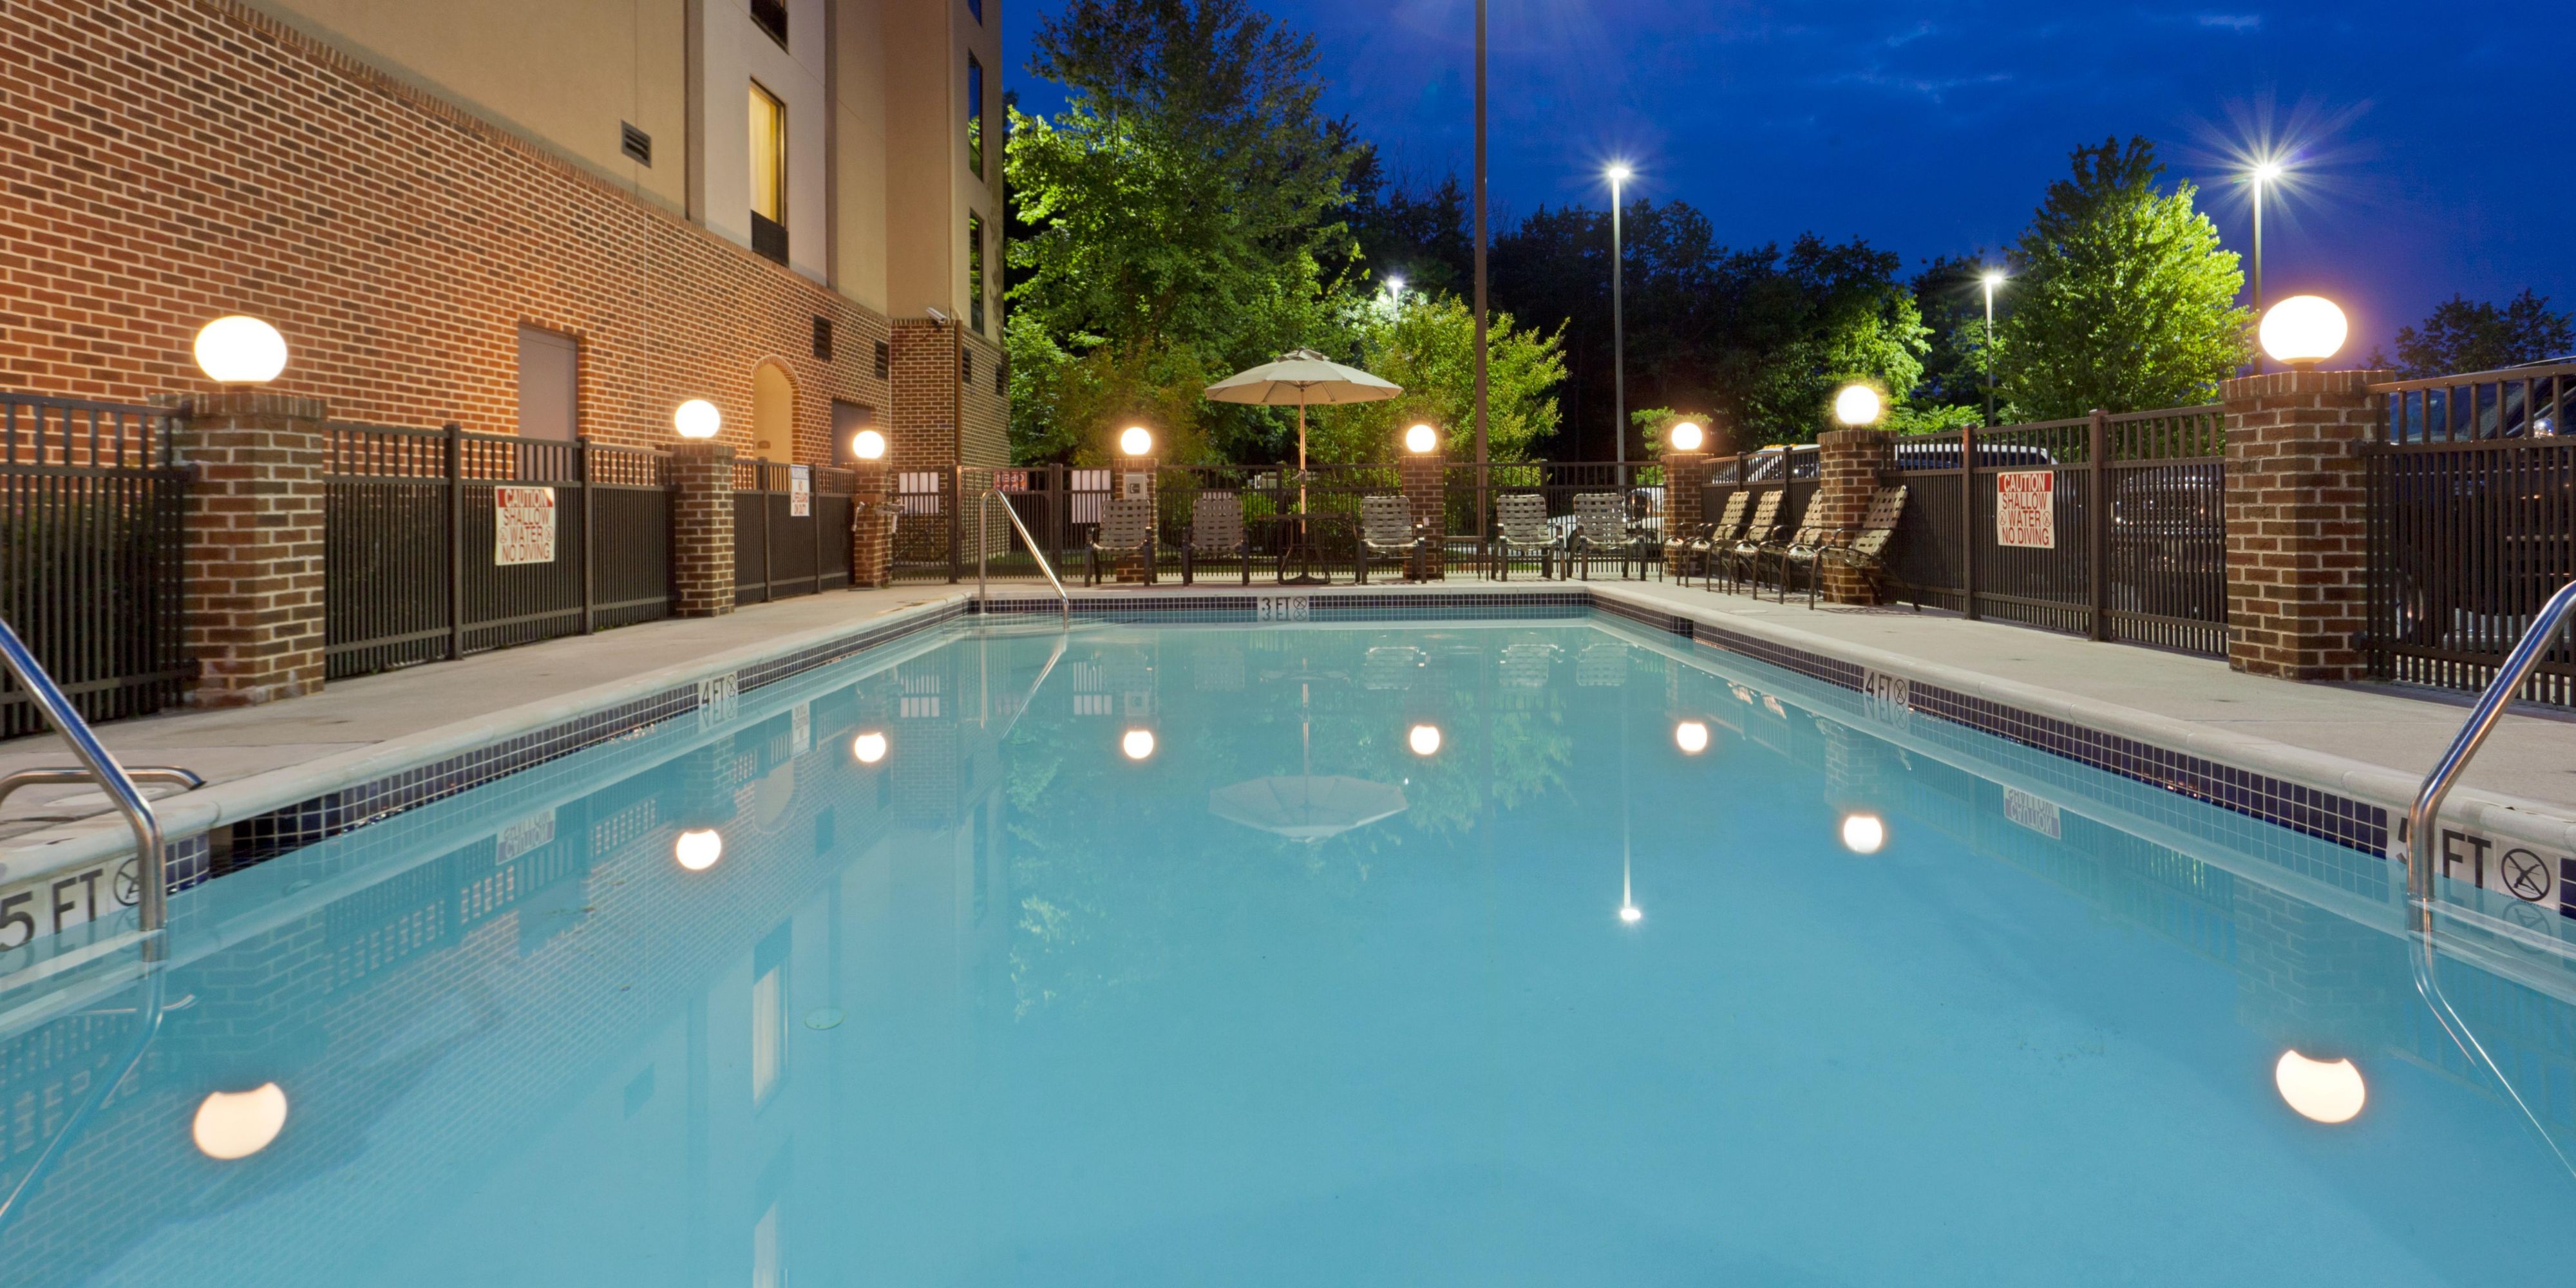 Bring your swimsuit and take a relaxing dip in our outdoor pool. Open Memorial Day Weekend through Labor Day Weekend.